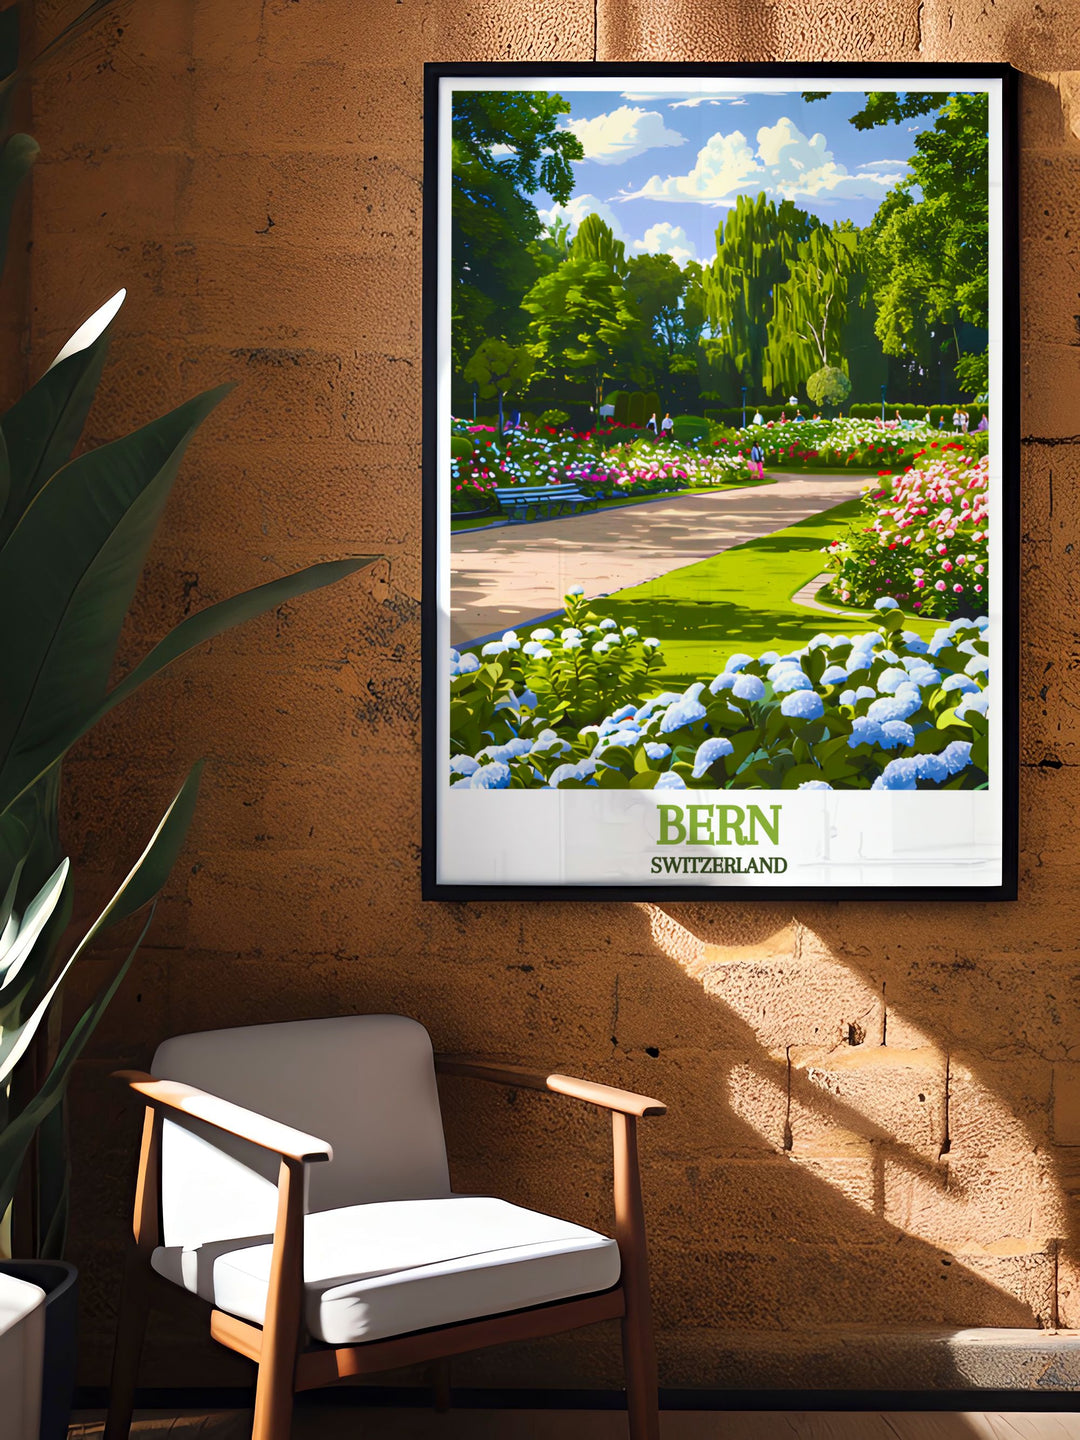 This vibrant travel poster showcases the stunning scenery of the Swiss Alps and the historic architecture of Bern, perfect for adding a touch of Switzerlands charm to your walls.